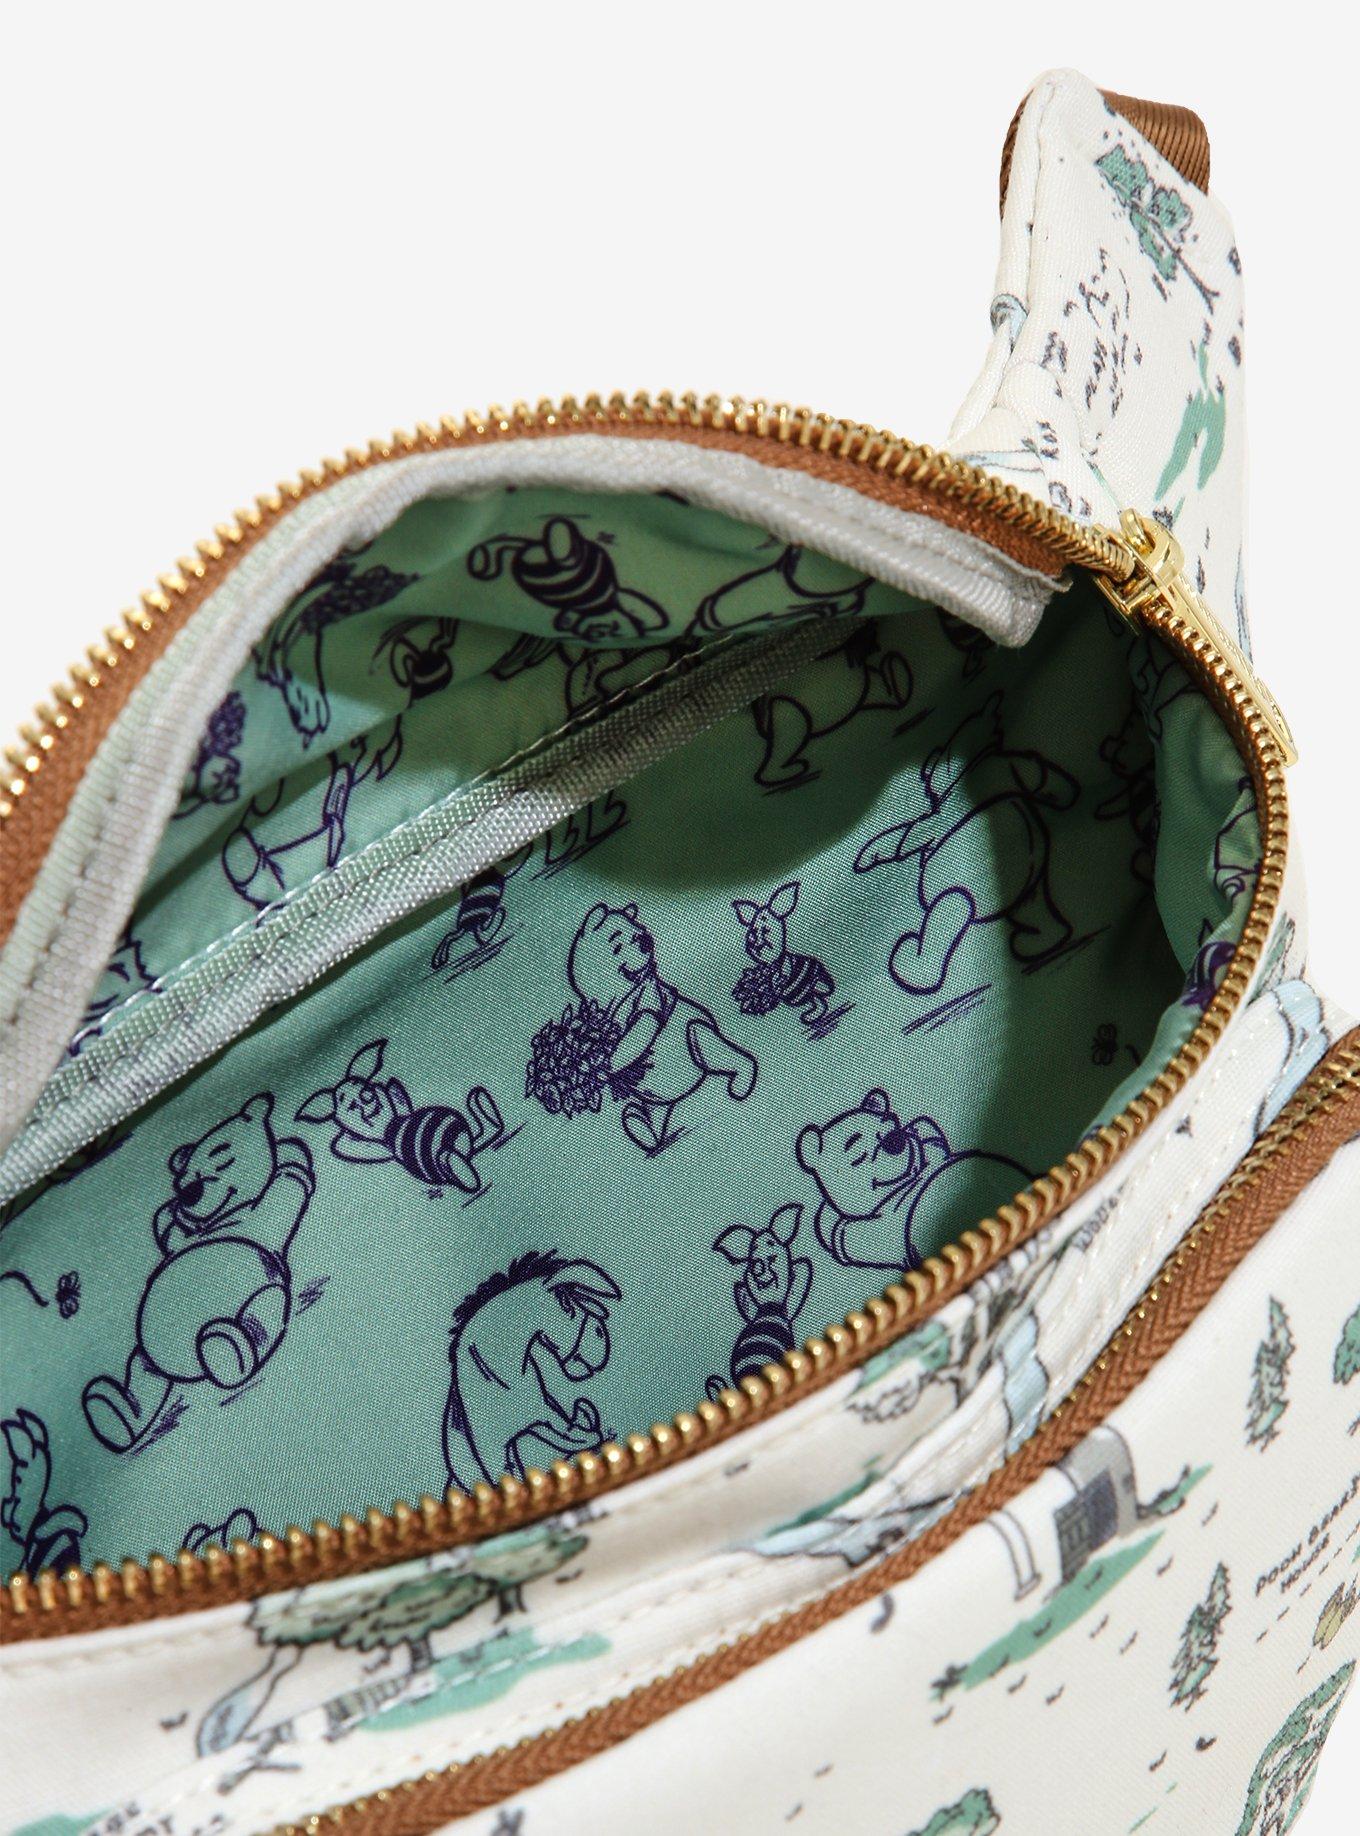 Loungefly Disney Winnie the Pooh Hundred Acre Wood Fanny Pack - BoxLunch Exclusive, , alternate